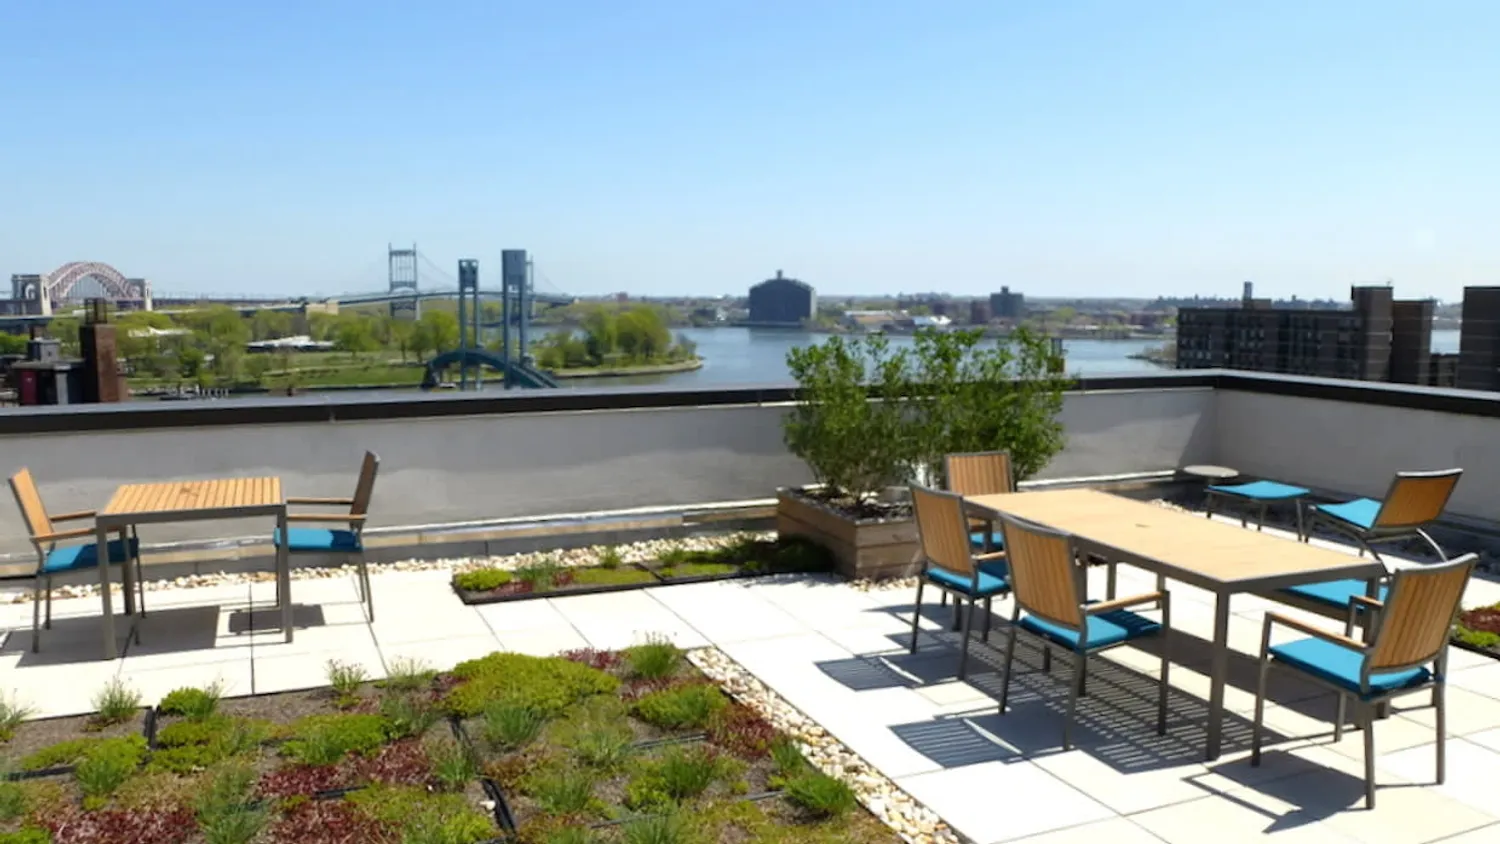 Landscaped Roof Deck with City and River Views